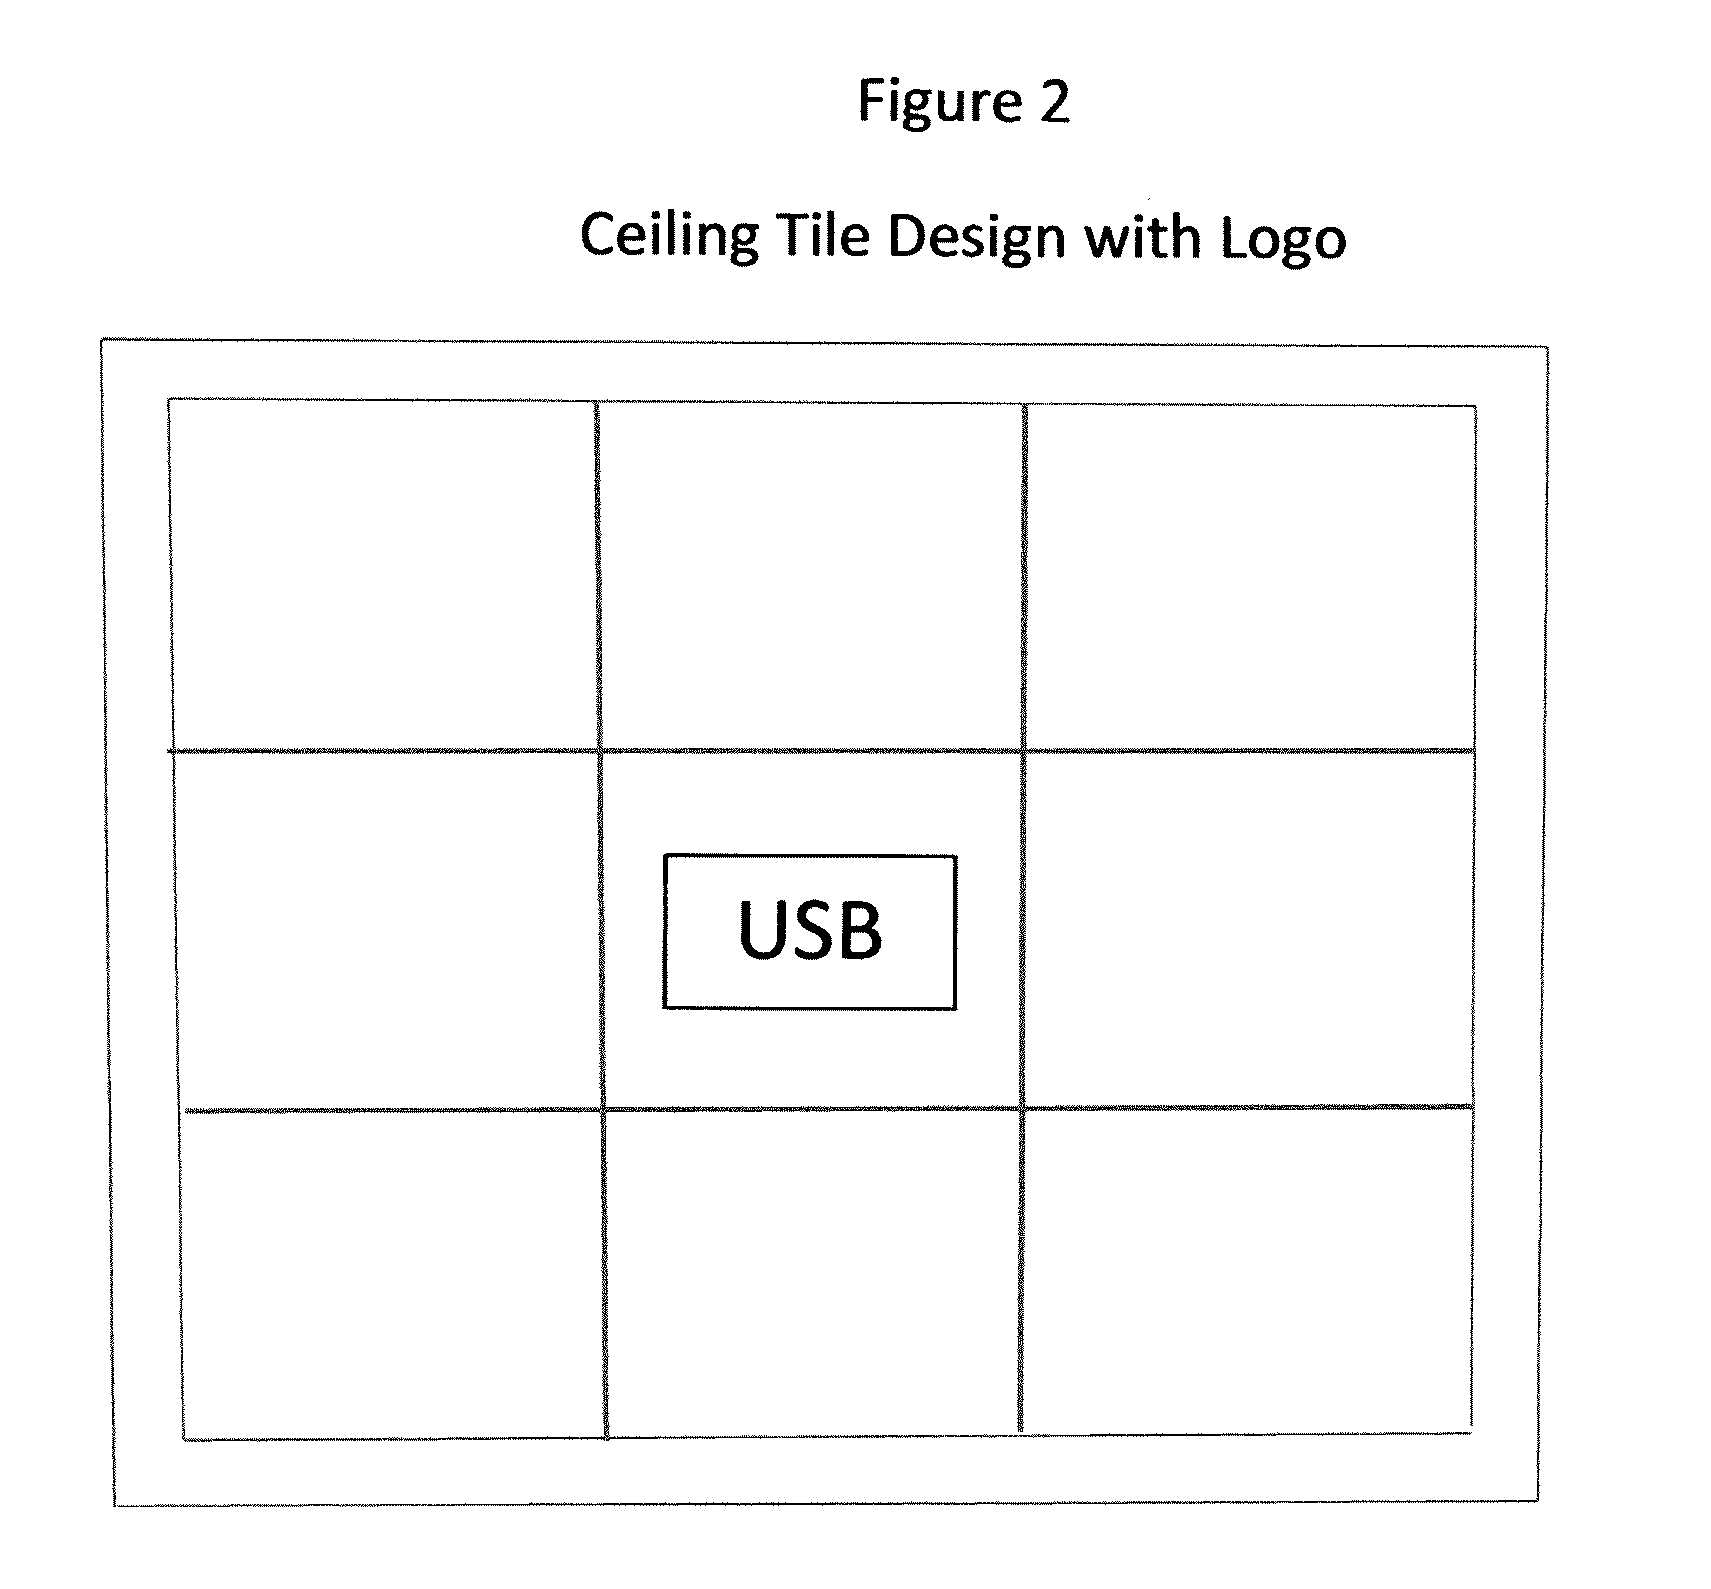 Apparatus and method of making a nonwoven ceiling tile and wall panel